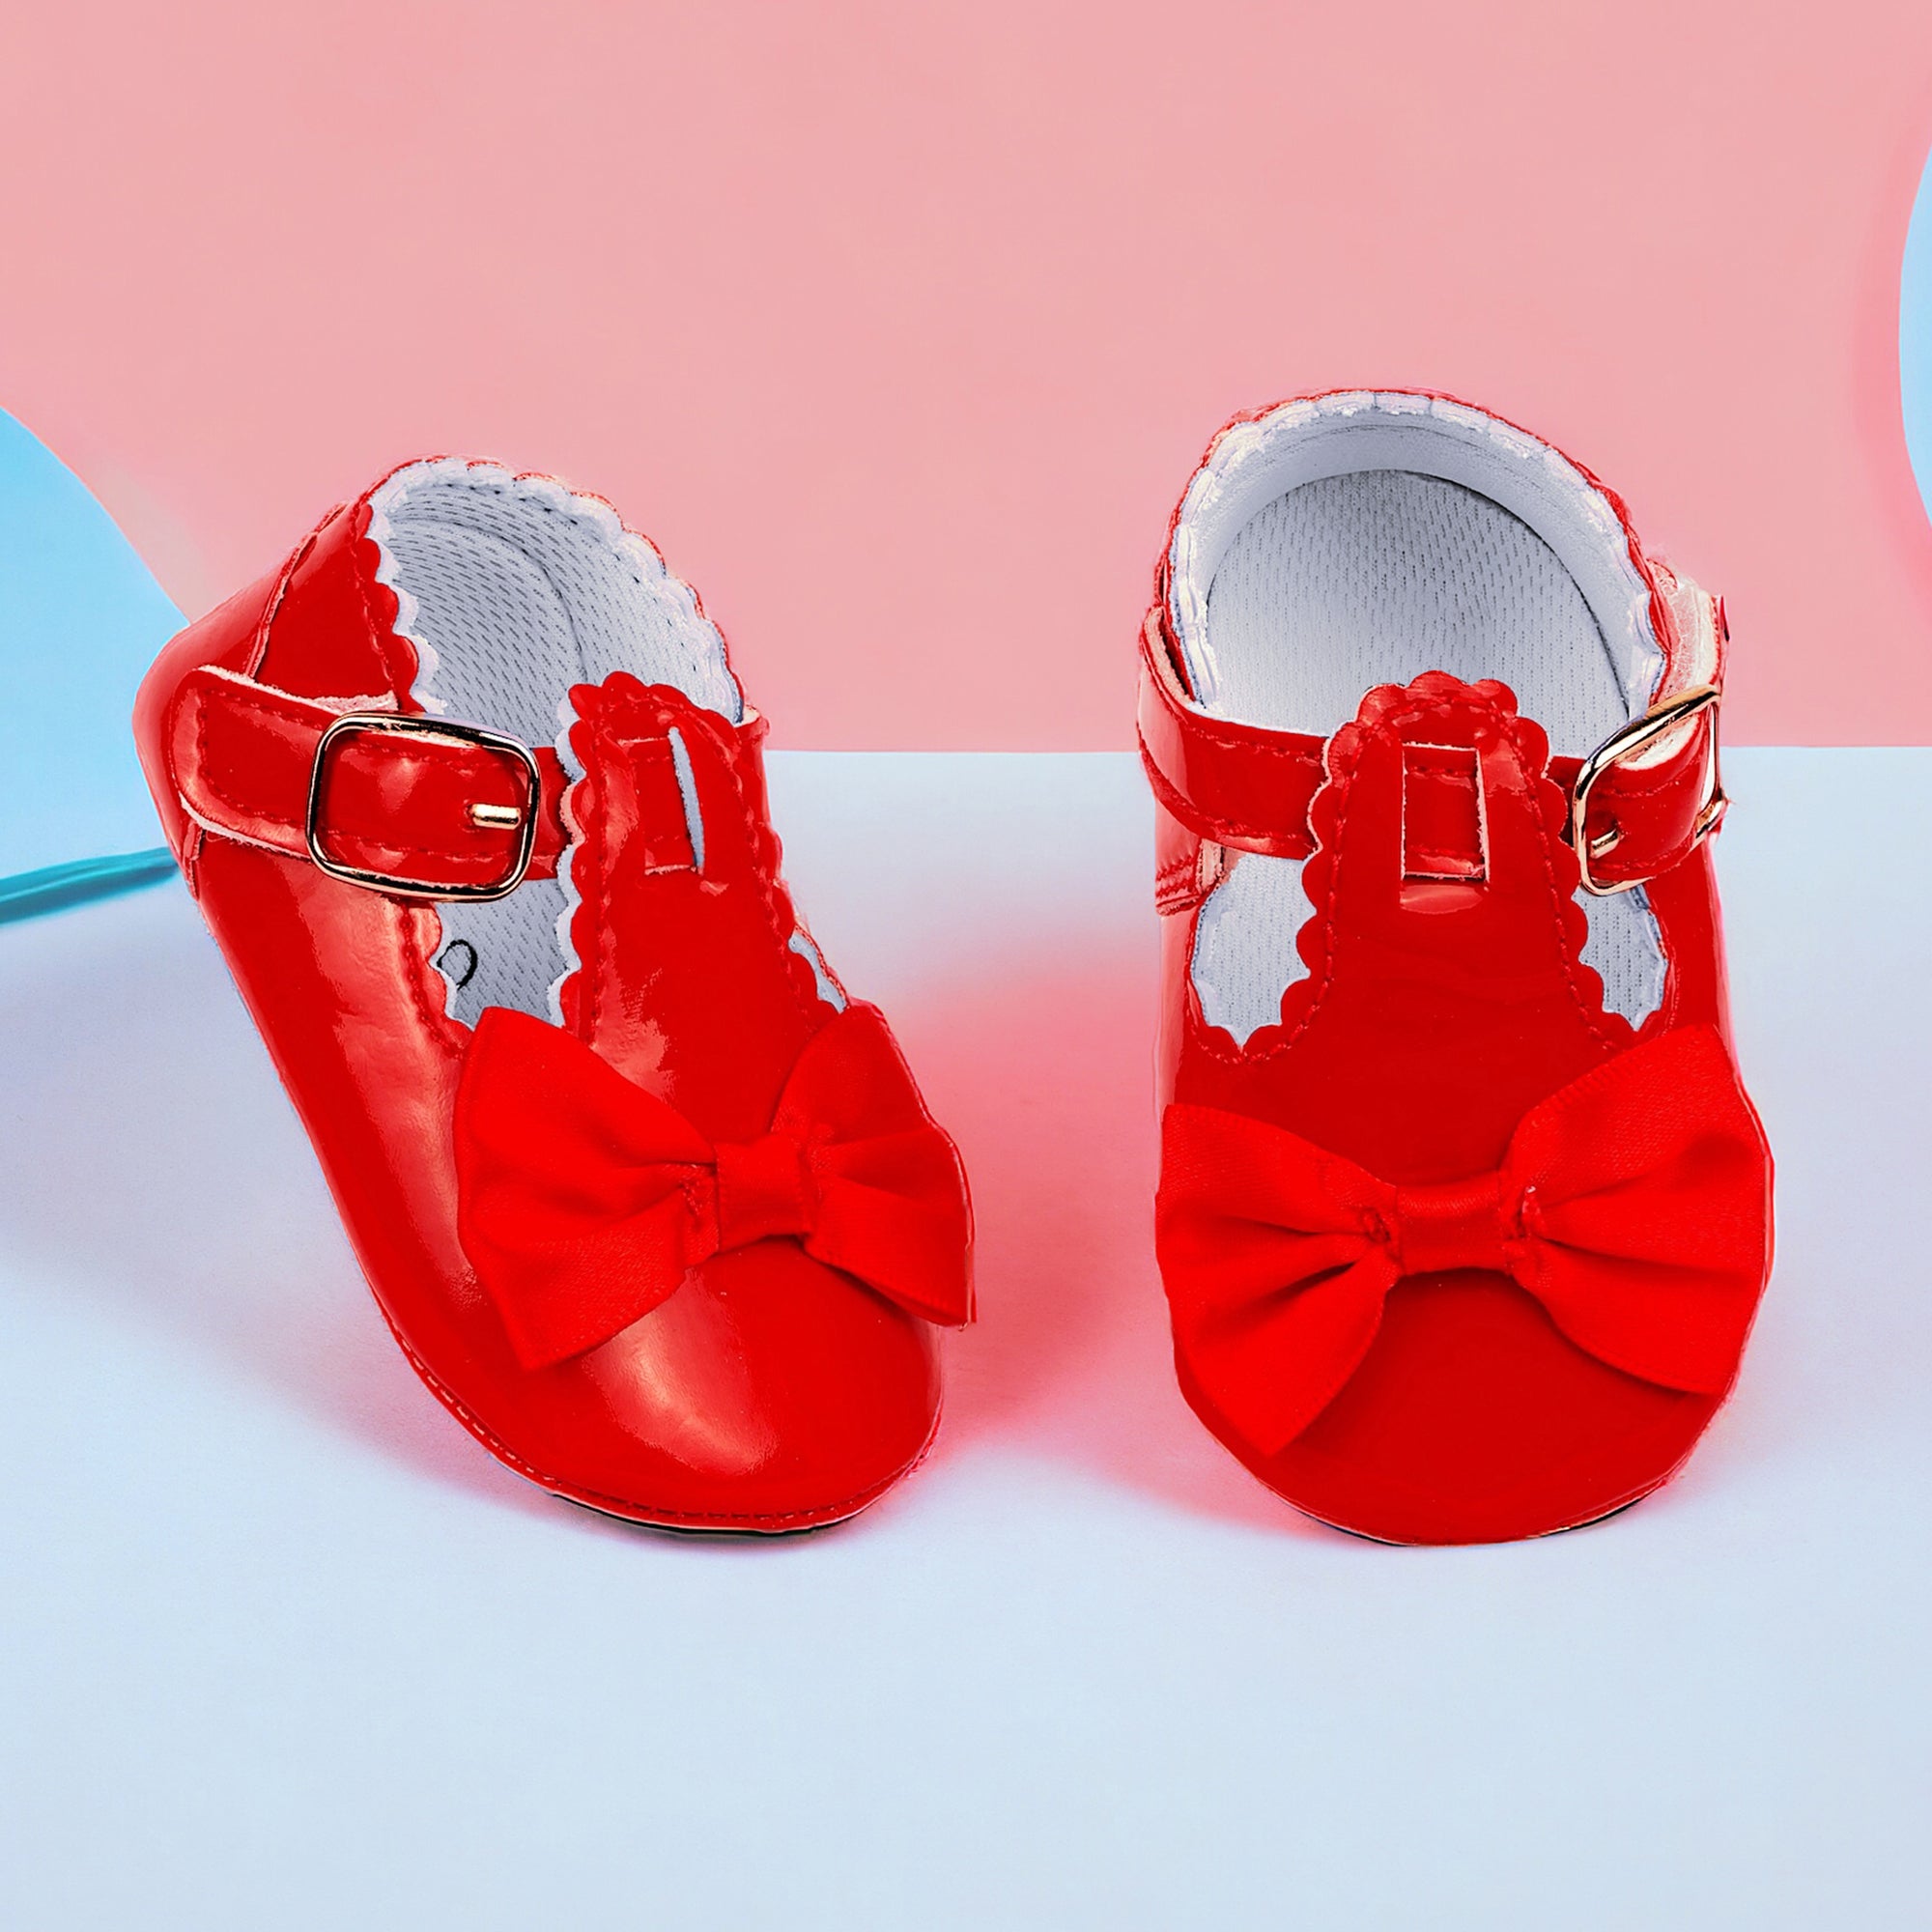 Baby Moo Mary Jane Bow Patent Leather Anti-Skid Ballerina Booties - Red